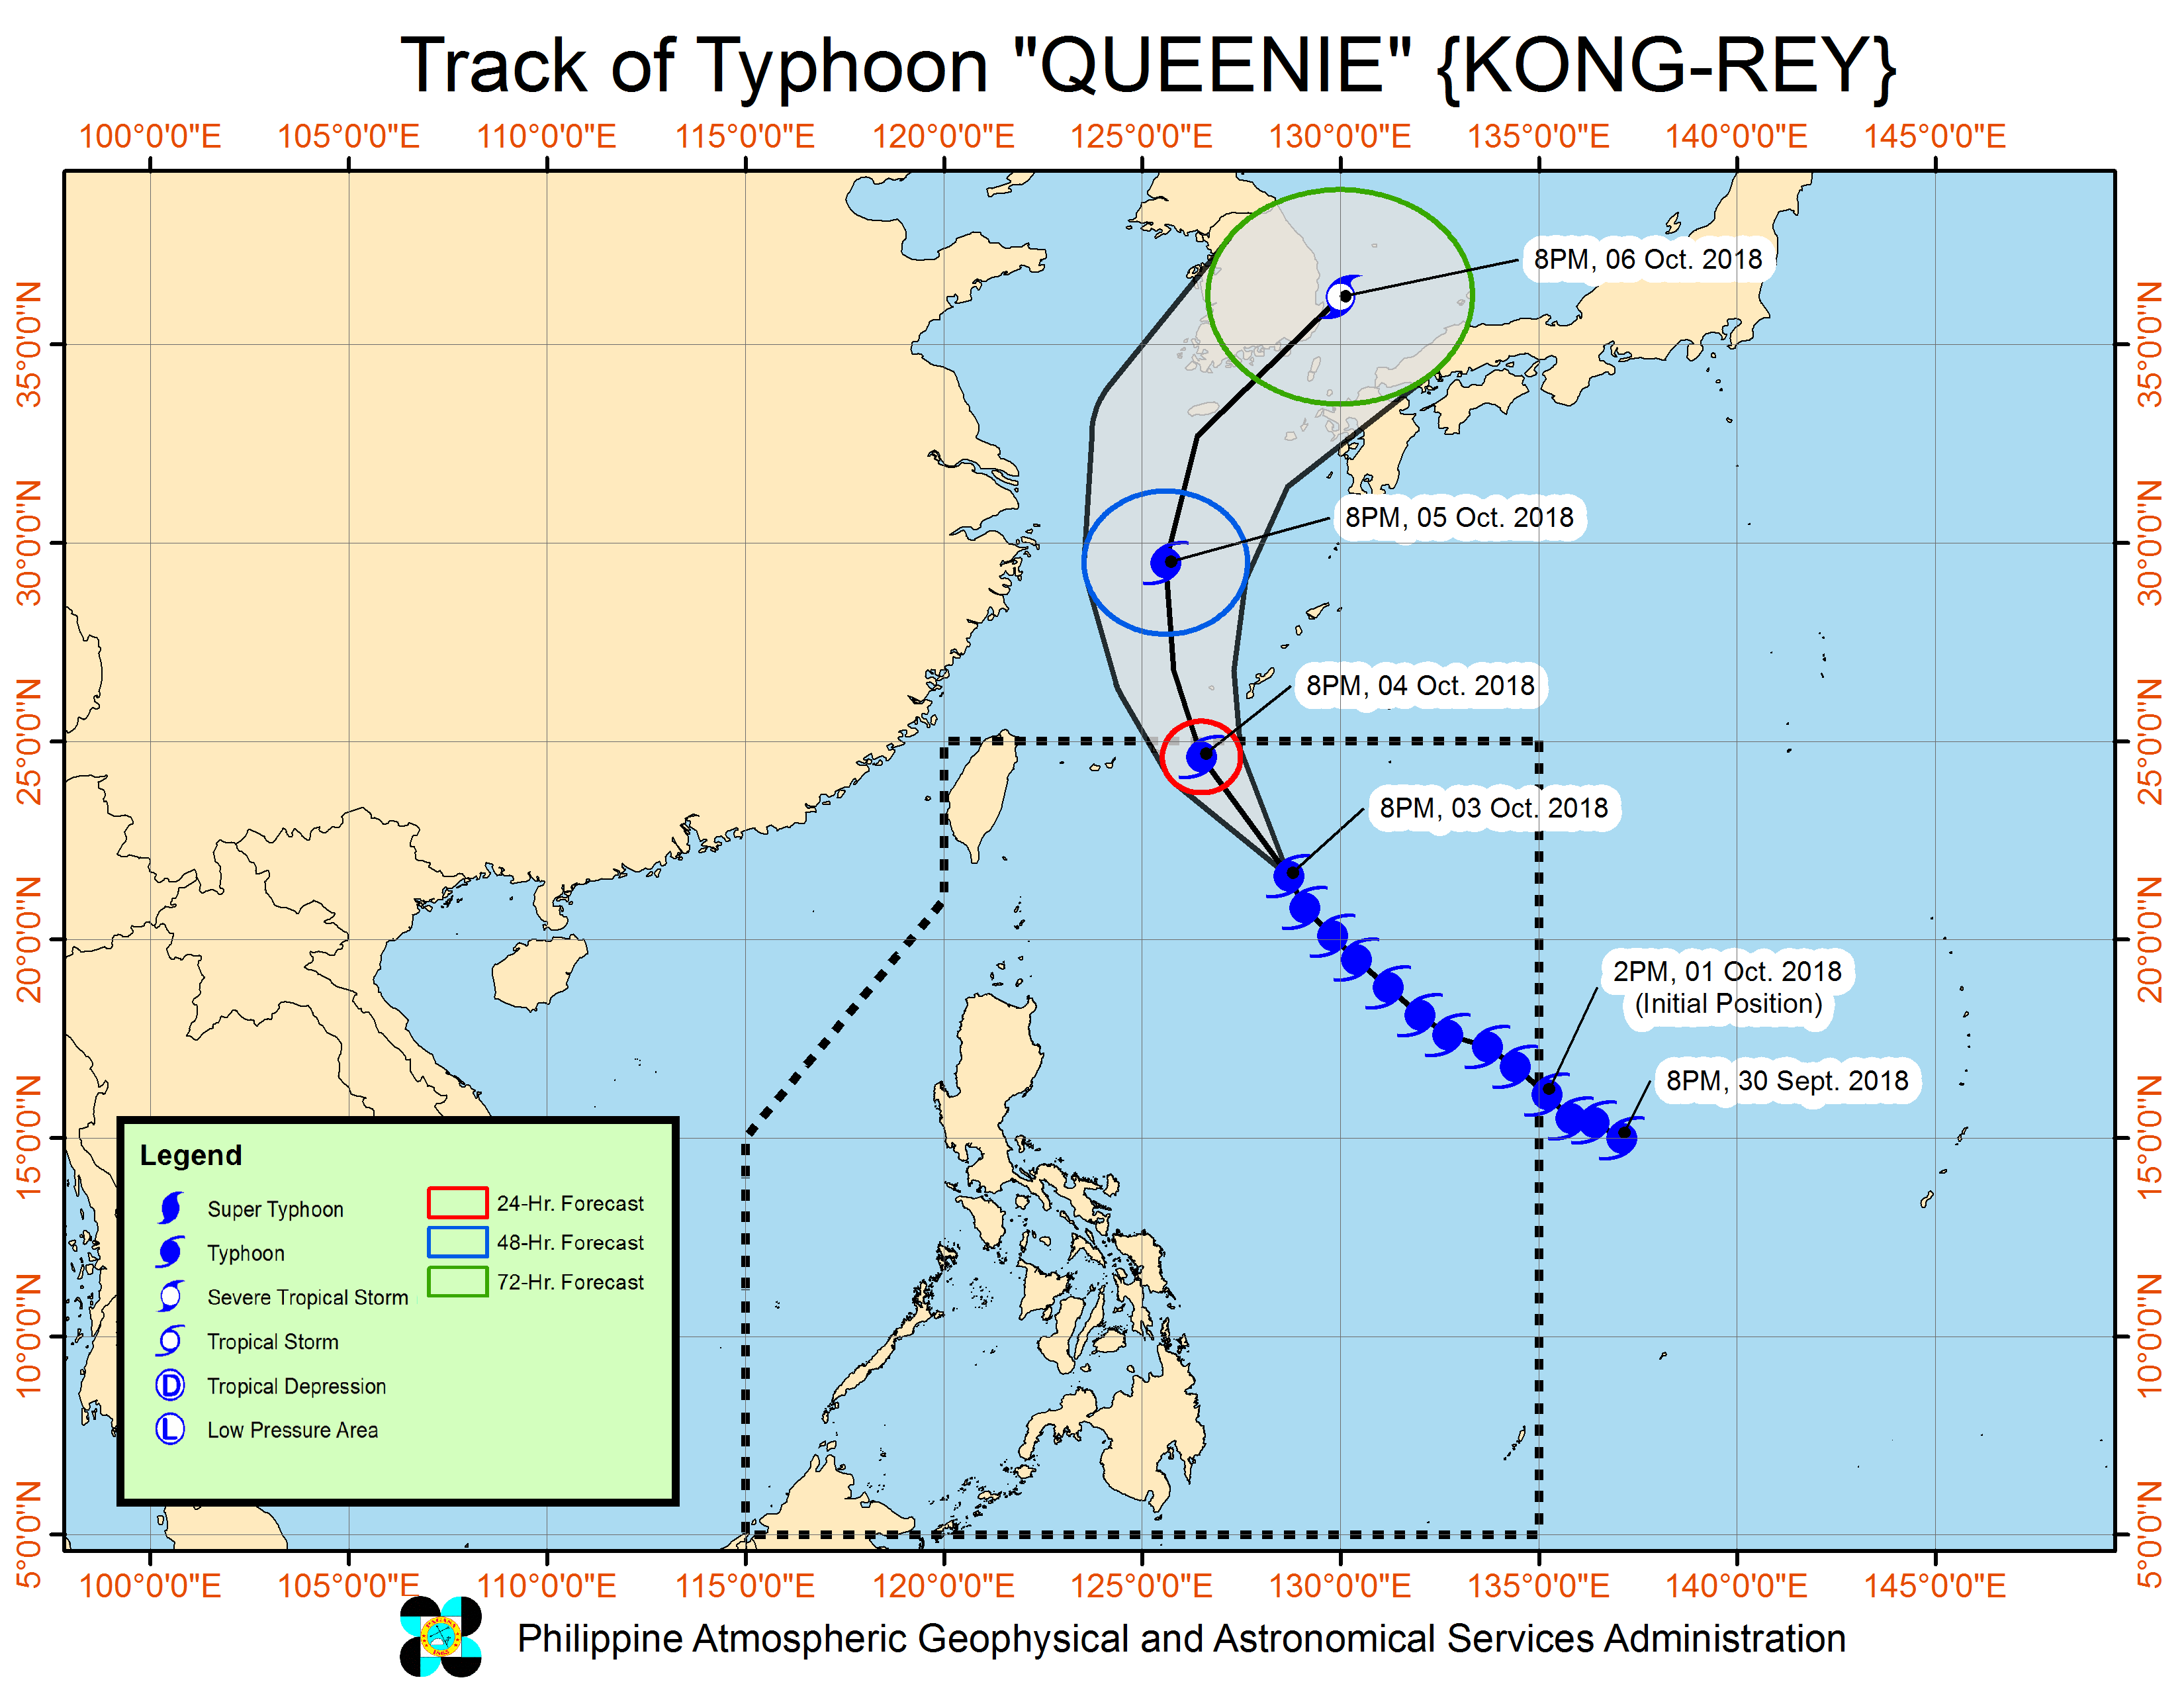 Forecast track of Typhoon Queenie (Kong-rey) as of October 3, 2018, 11 pm. Image from PAGASA  